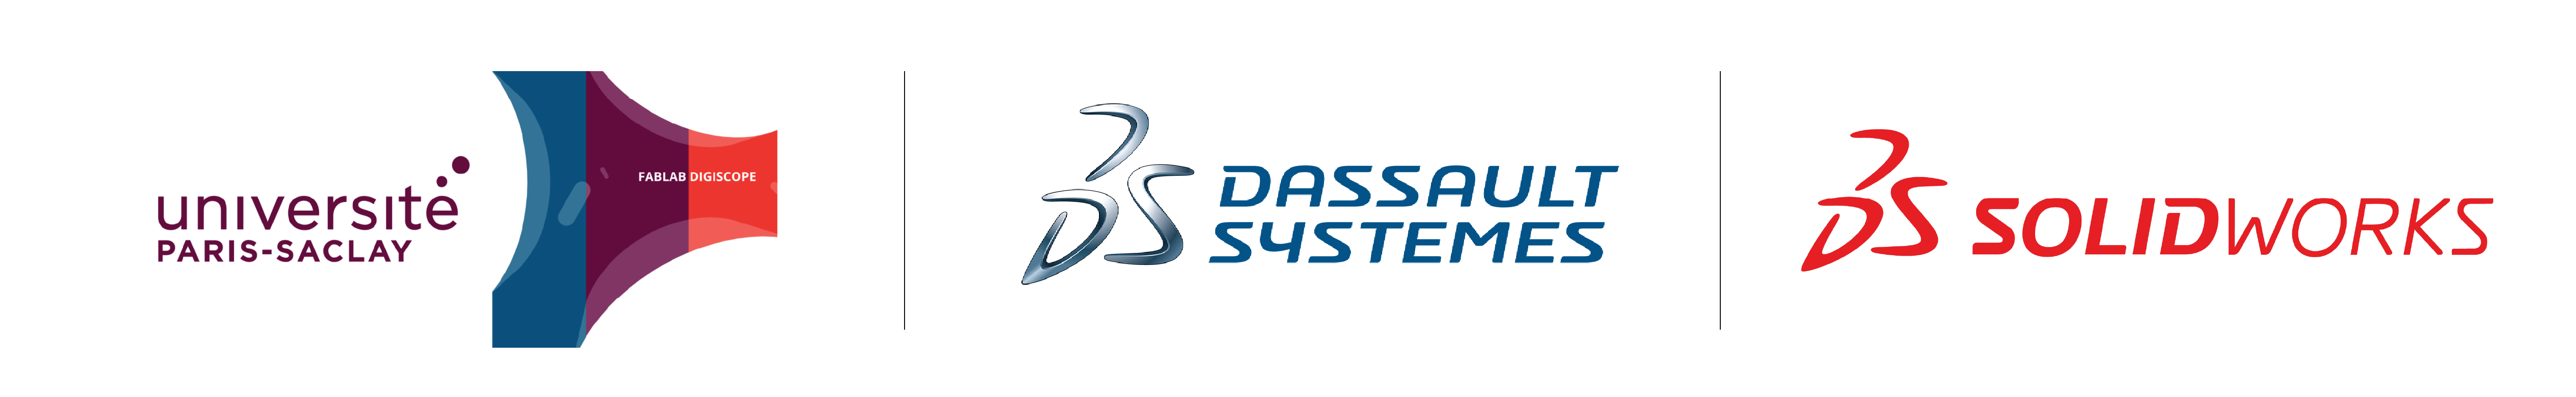 Dassault Systèmes  | Solidworks 3D Scholarships x Fabricademy 2021